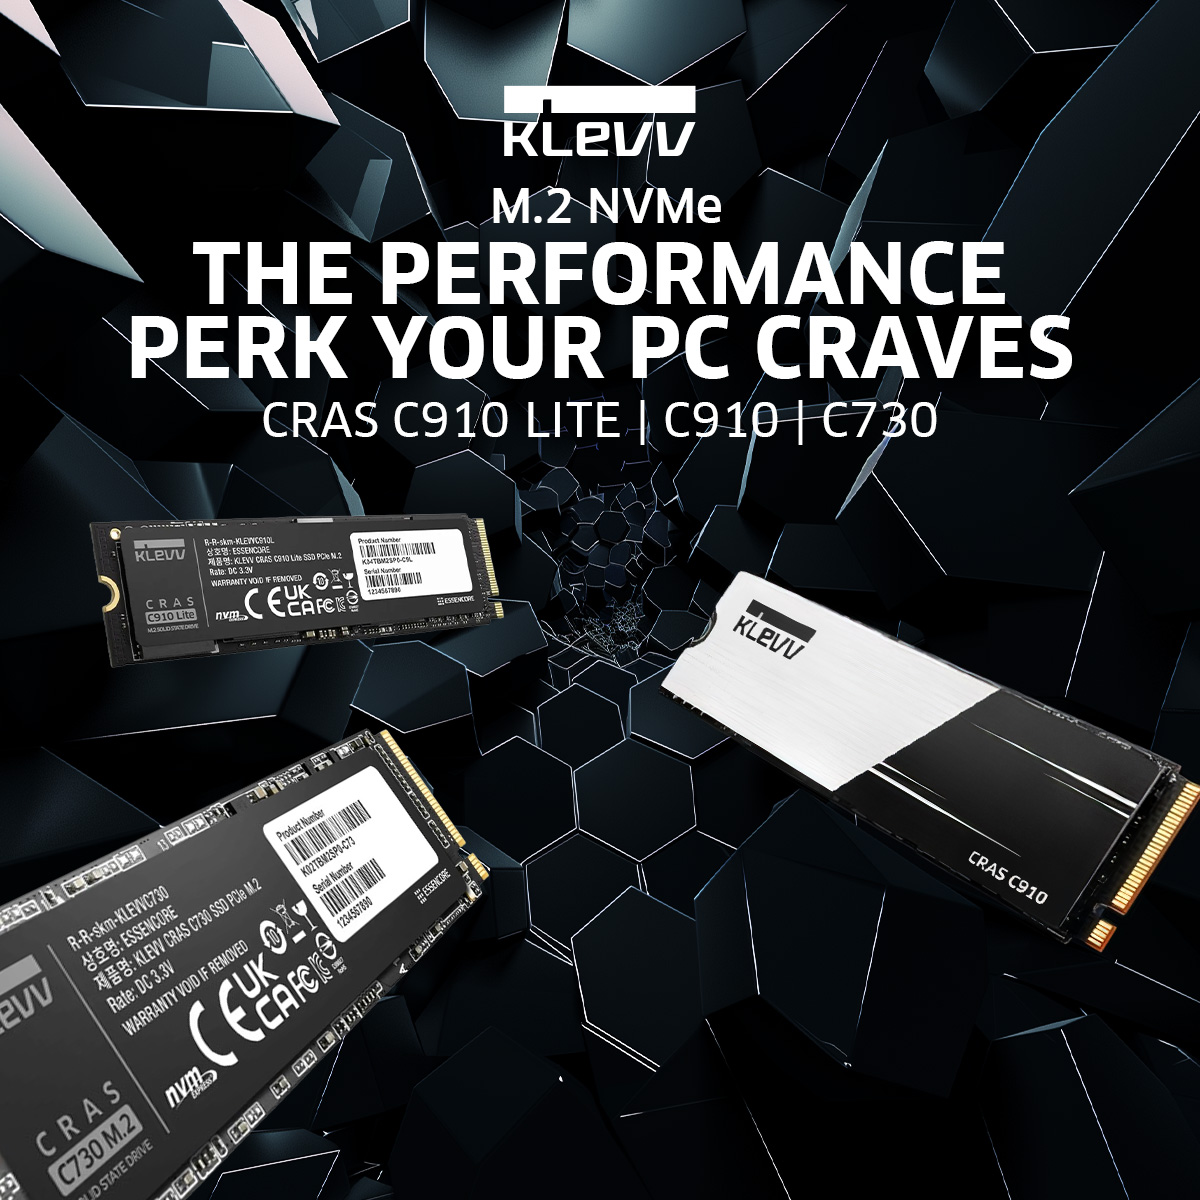 📈The performance perk your PC CRAVES!

KLEVV NVMe SSDs deliver unparalleled performance for your PC, taking your productivity and gaming to the next level!

✅Boot up your system in seconds
✅Load games and applications faster than ever
✅Experience seamless multitasking and…